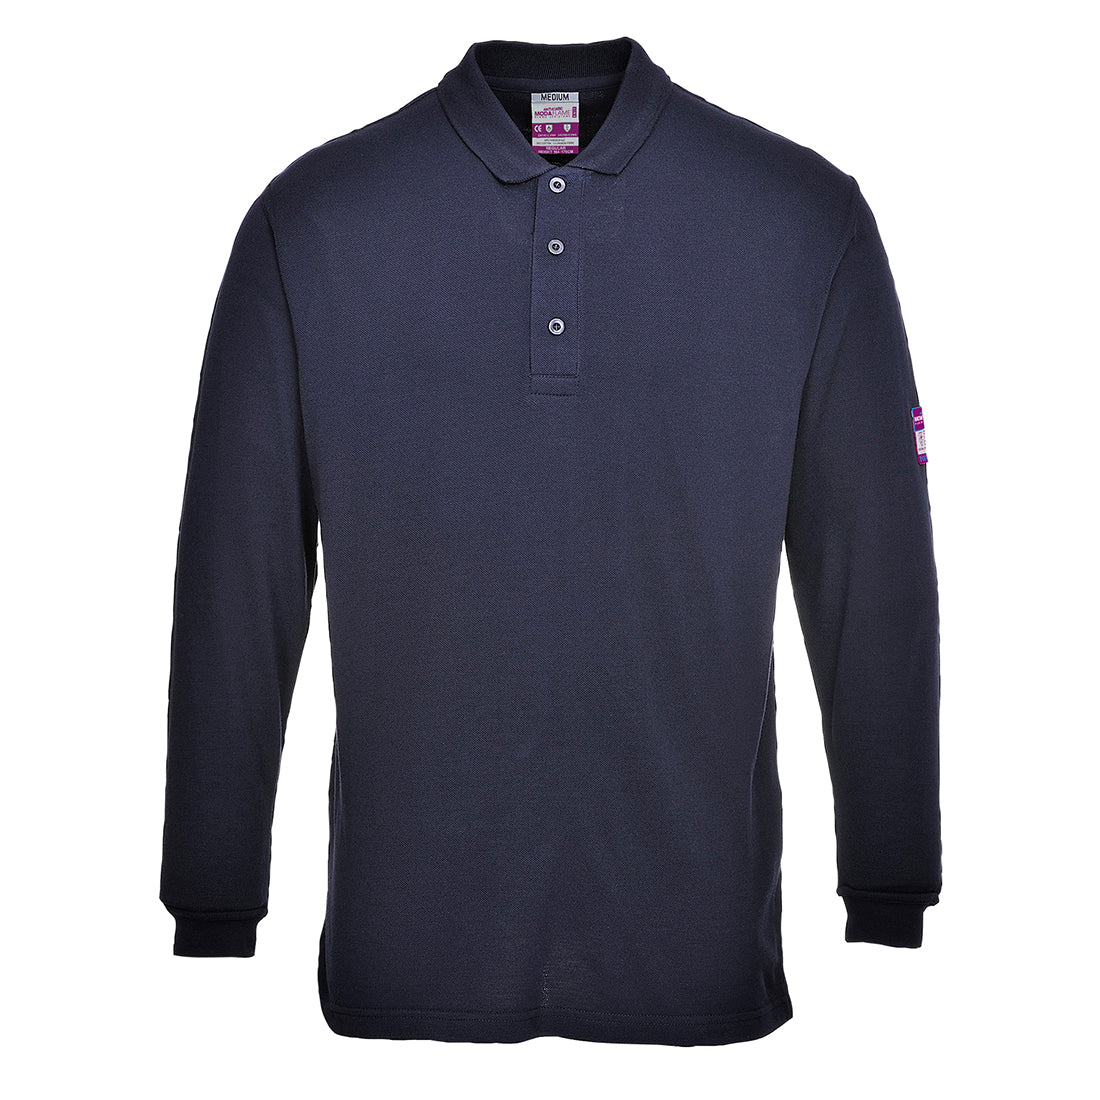 Flame Resistant Anti-Static Long Sleeve Polo Shirt 4.3 CAL - FR10